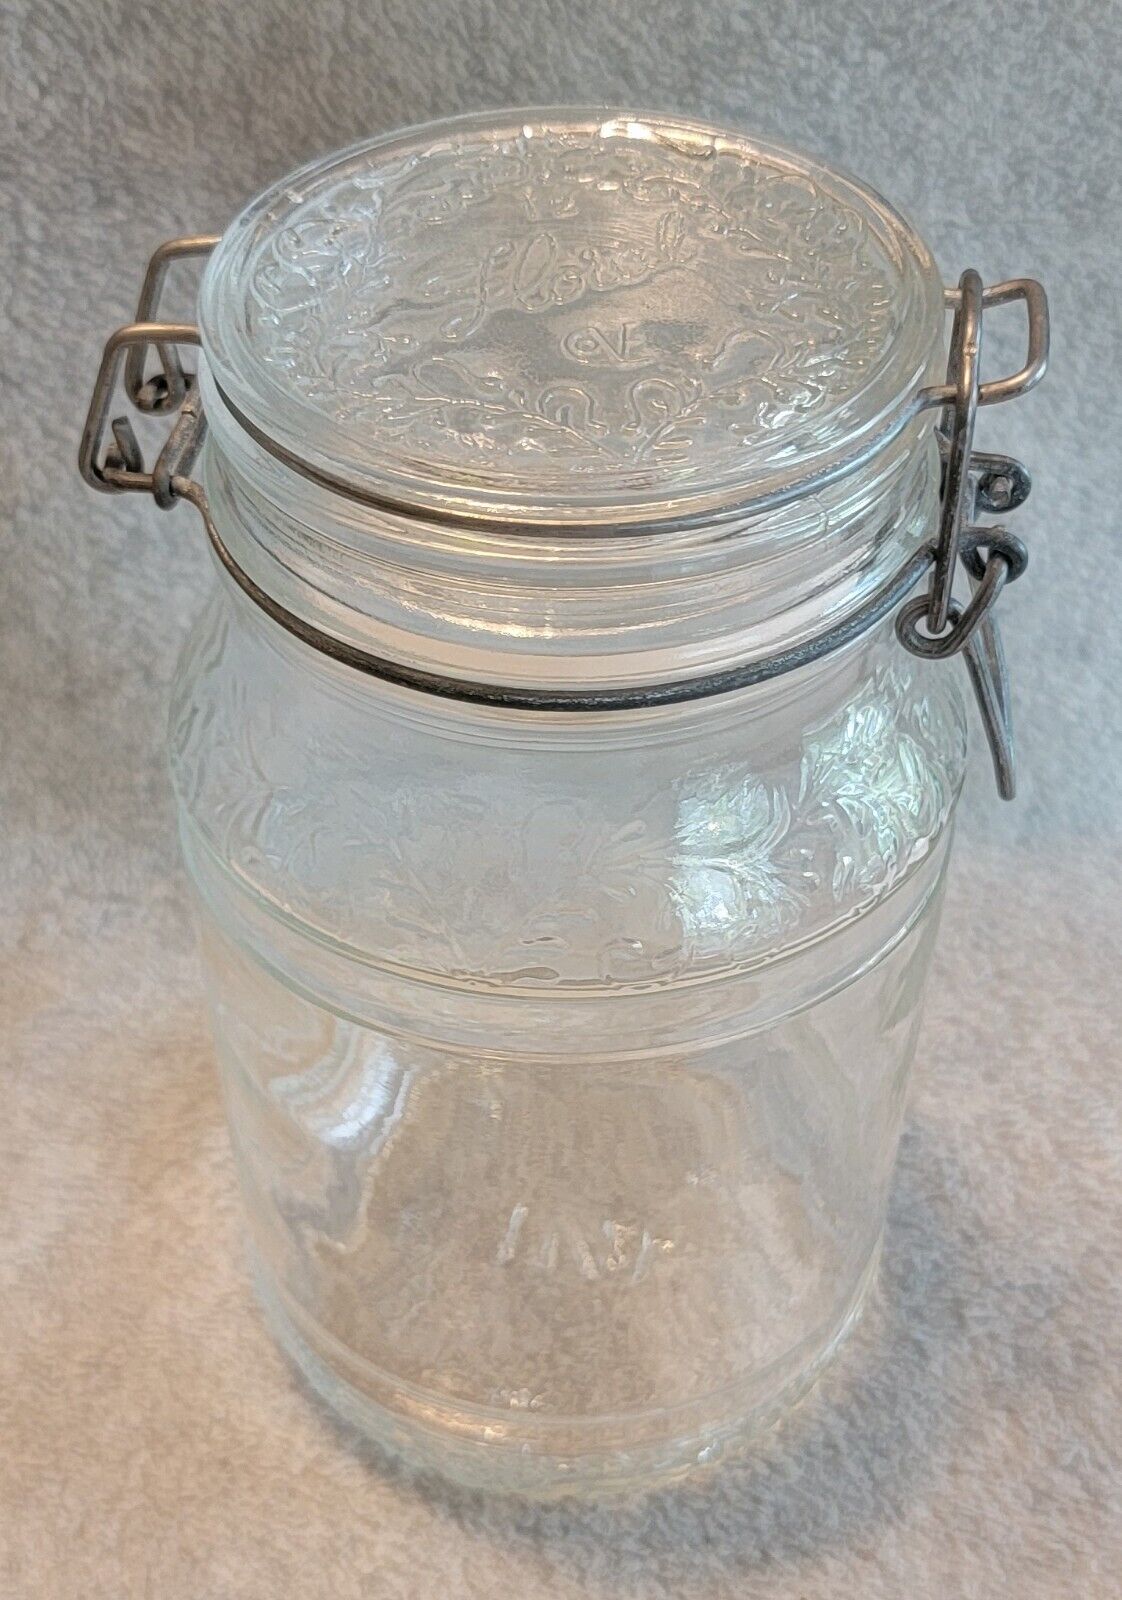 Vintage Floral Cove Latch Glass Storage Jar Made in Italy